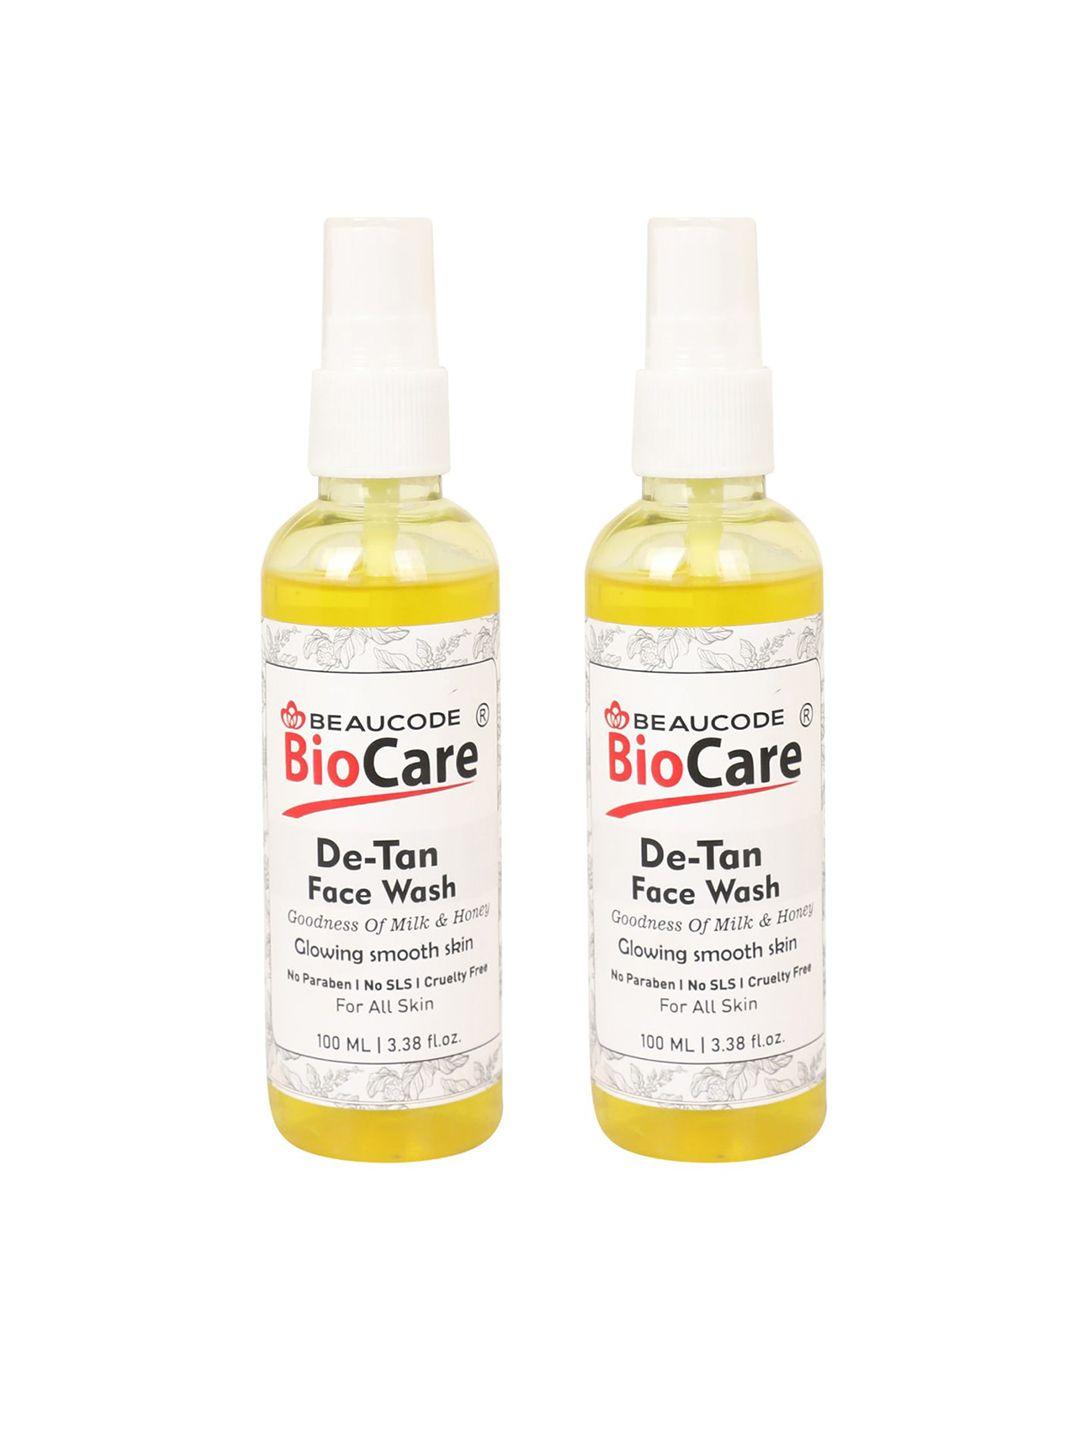 beaucode biocare set of 2 de-tan face wash for glowing smooth skin - 100 ml each